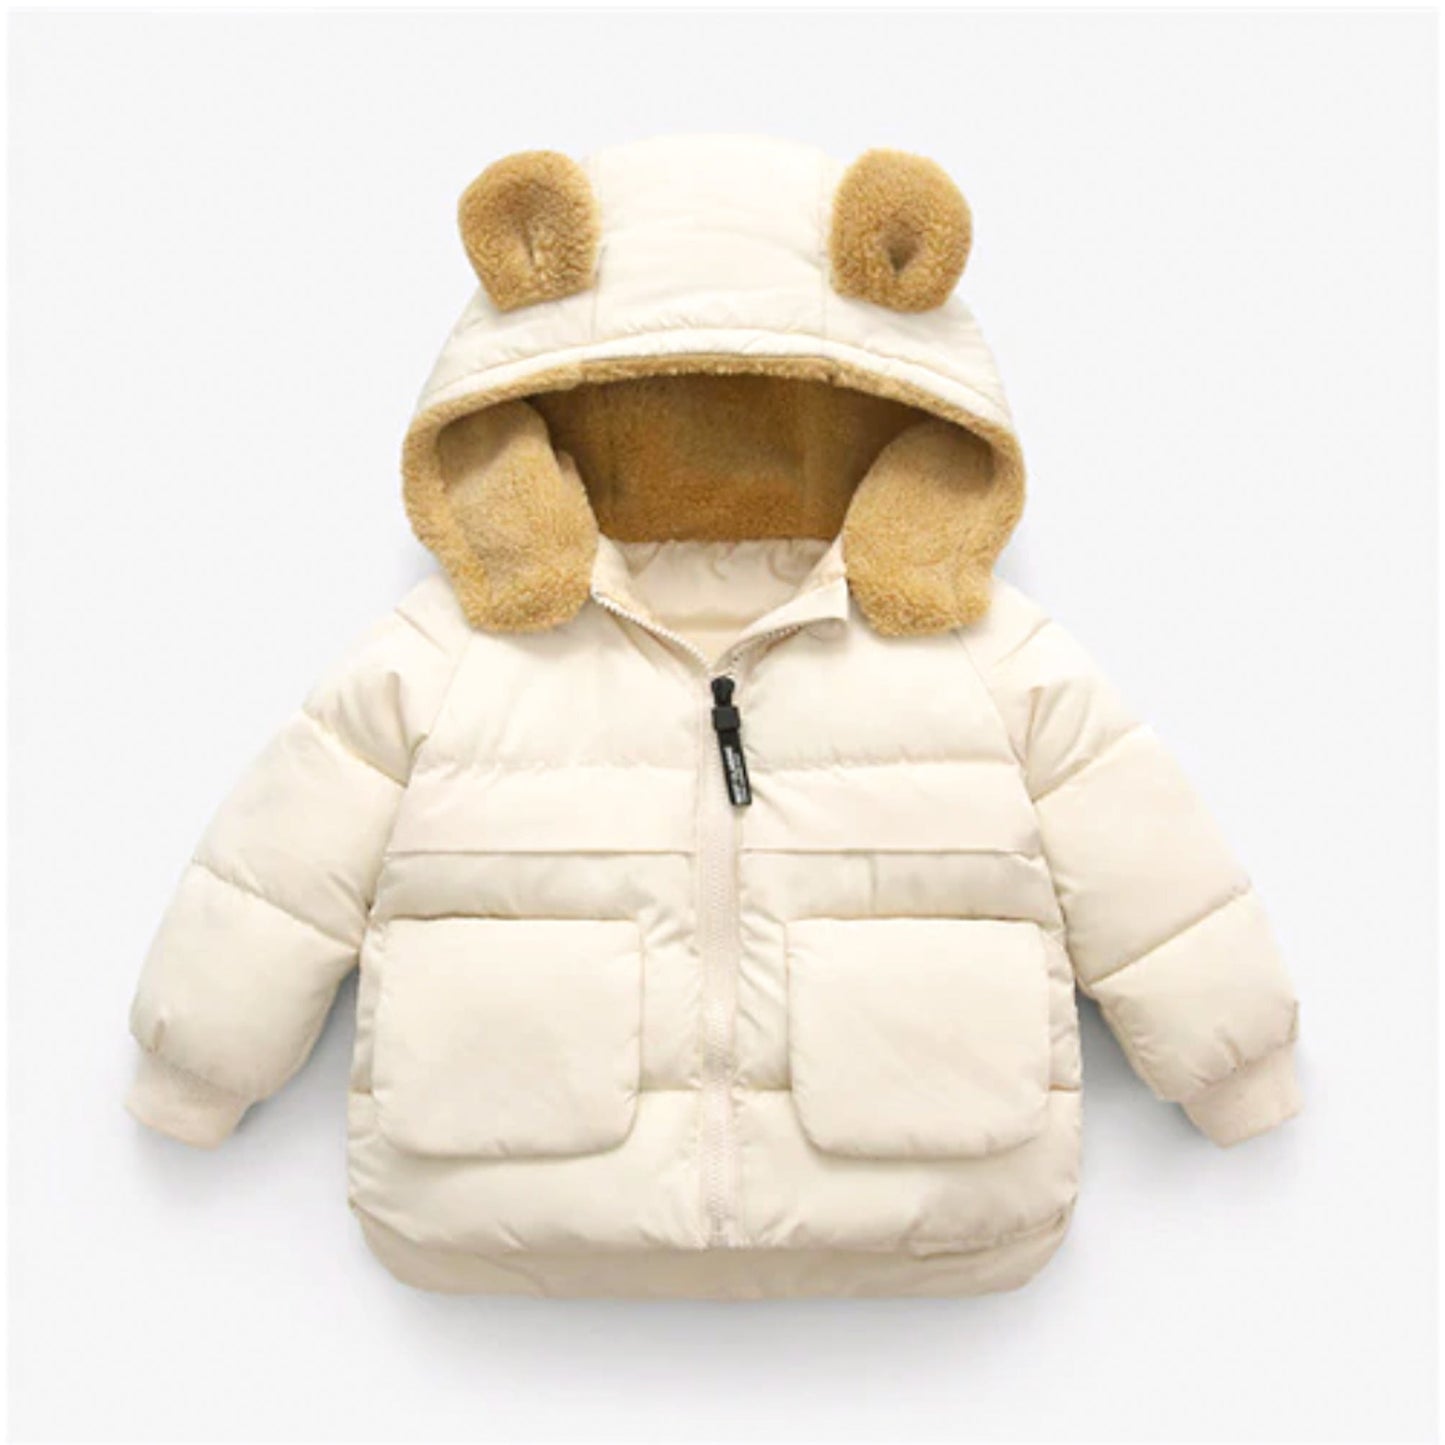 Children's Winter Hooded Jacket - Muddy Boots Home UK